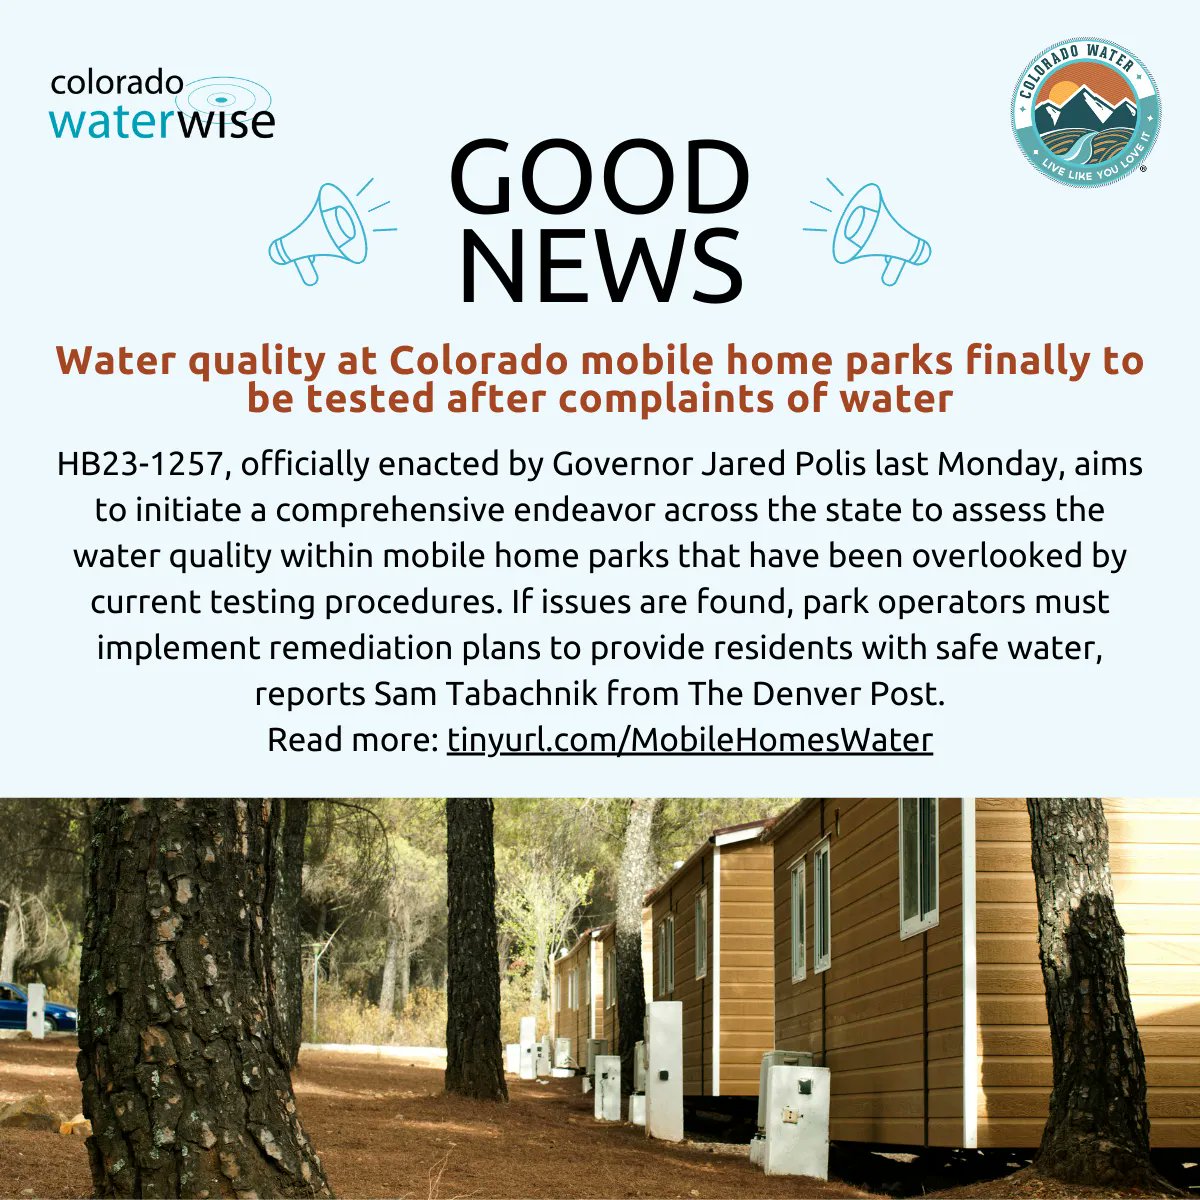 Good news! Read the full article here: buff.ly/43X3fN2

#ColoradoWater #COWater #CWW #ColoradoWaterWise #LLYLI #LiveLikeYouLoveIt #water #goodnews #waternews